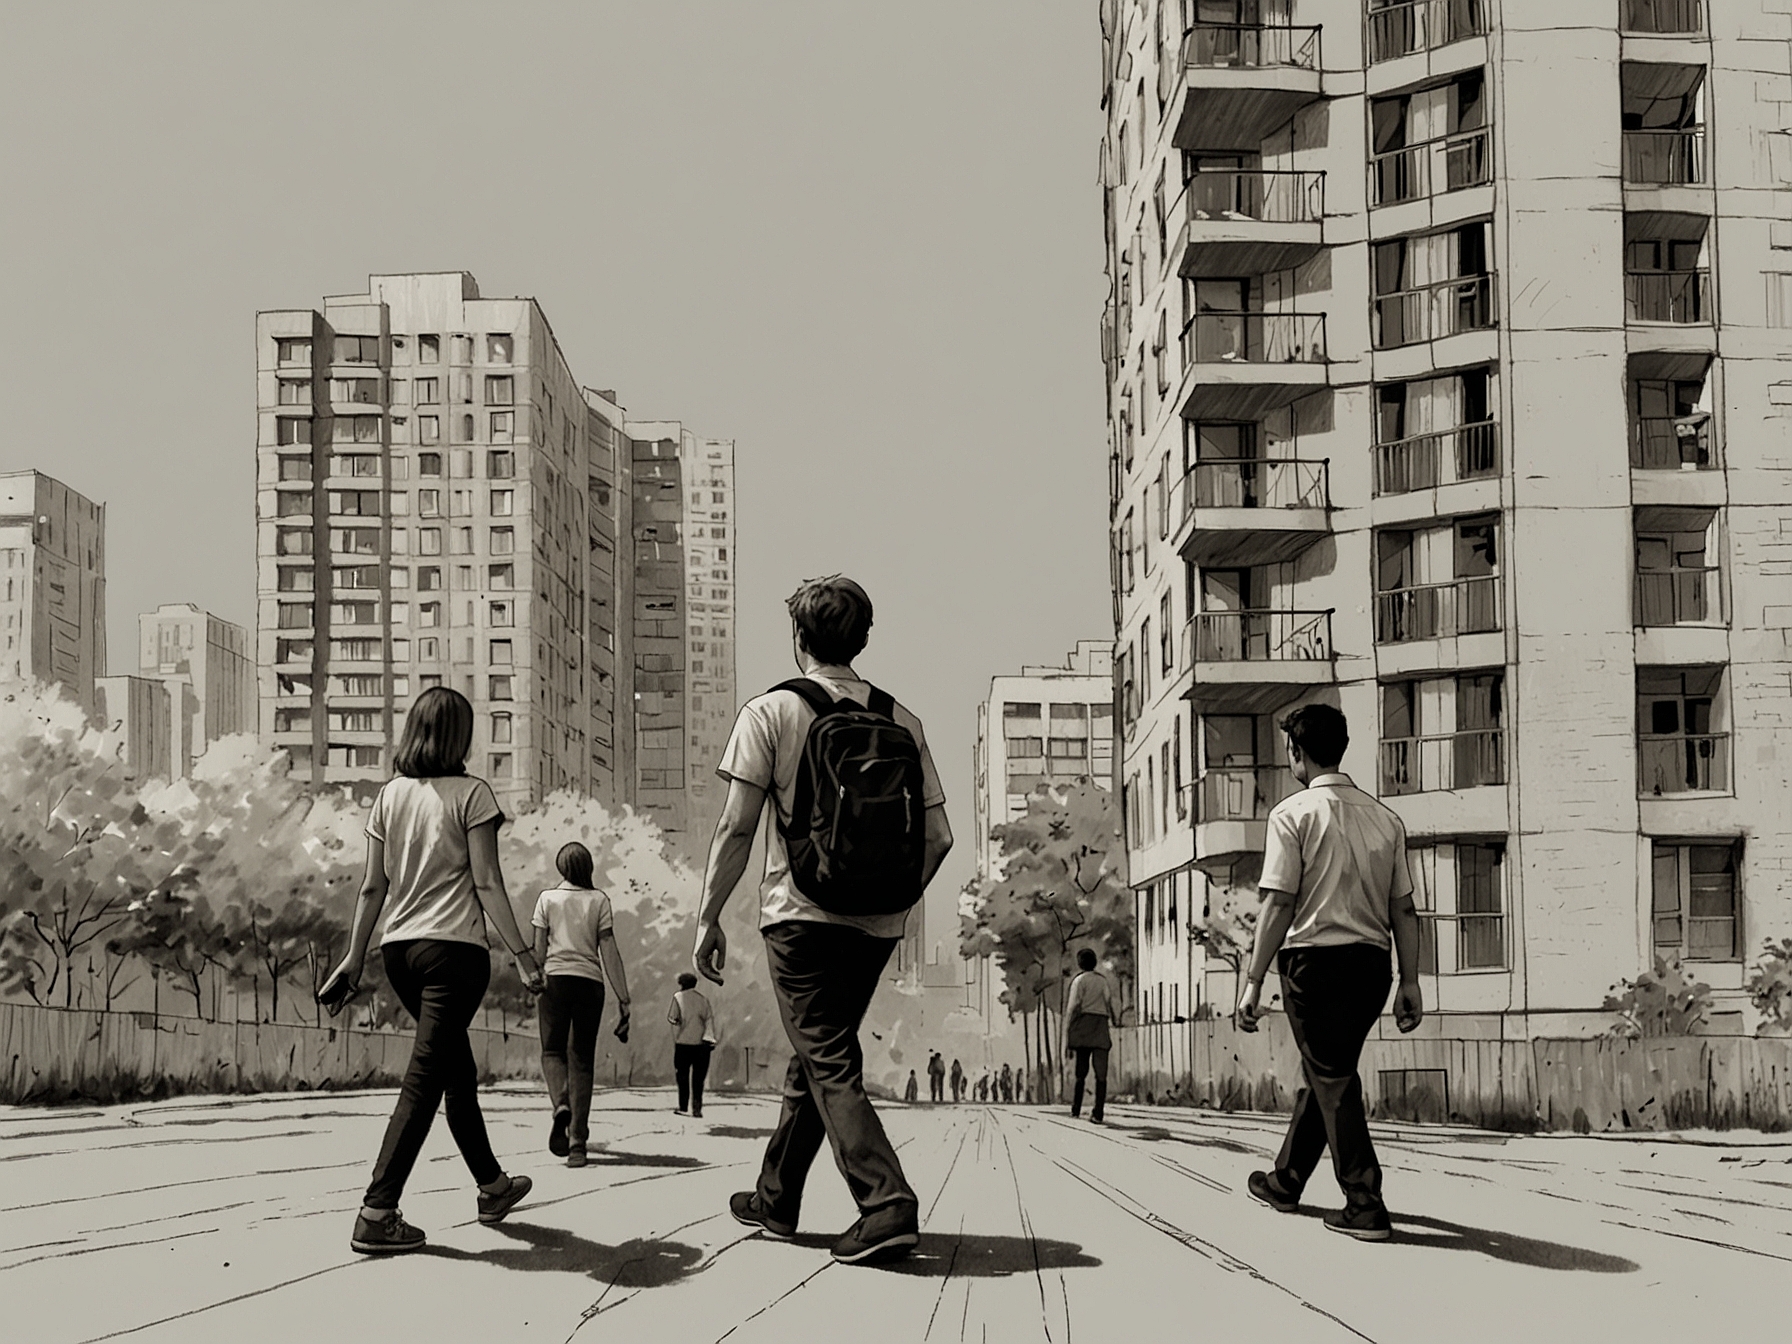 An urban setting showing millennials walking past high-rise apartment buildings, illustrating the financial and emotional hurdles they face in achieving homeownership in expensive cities.